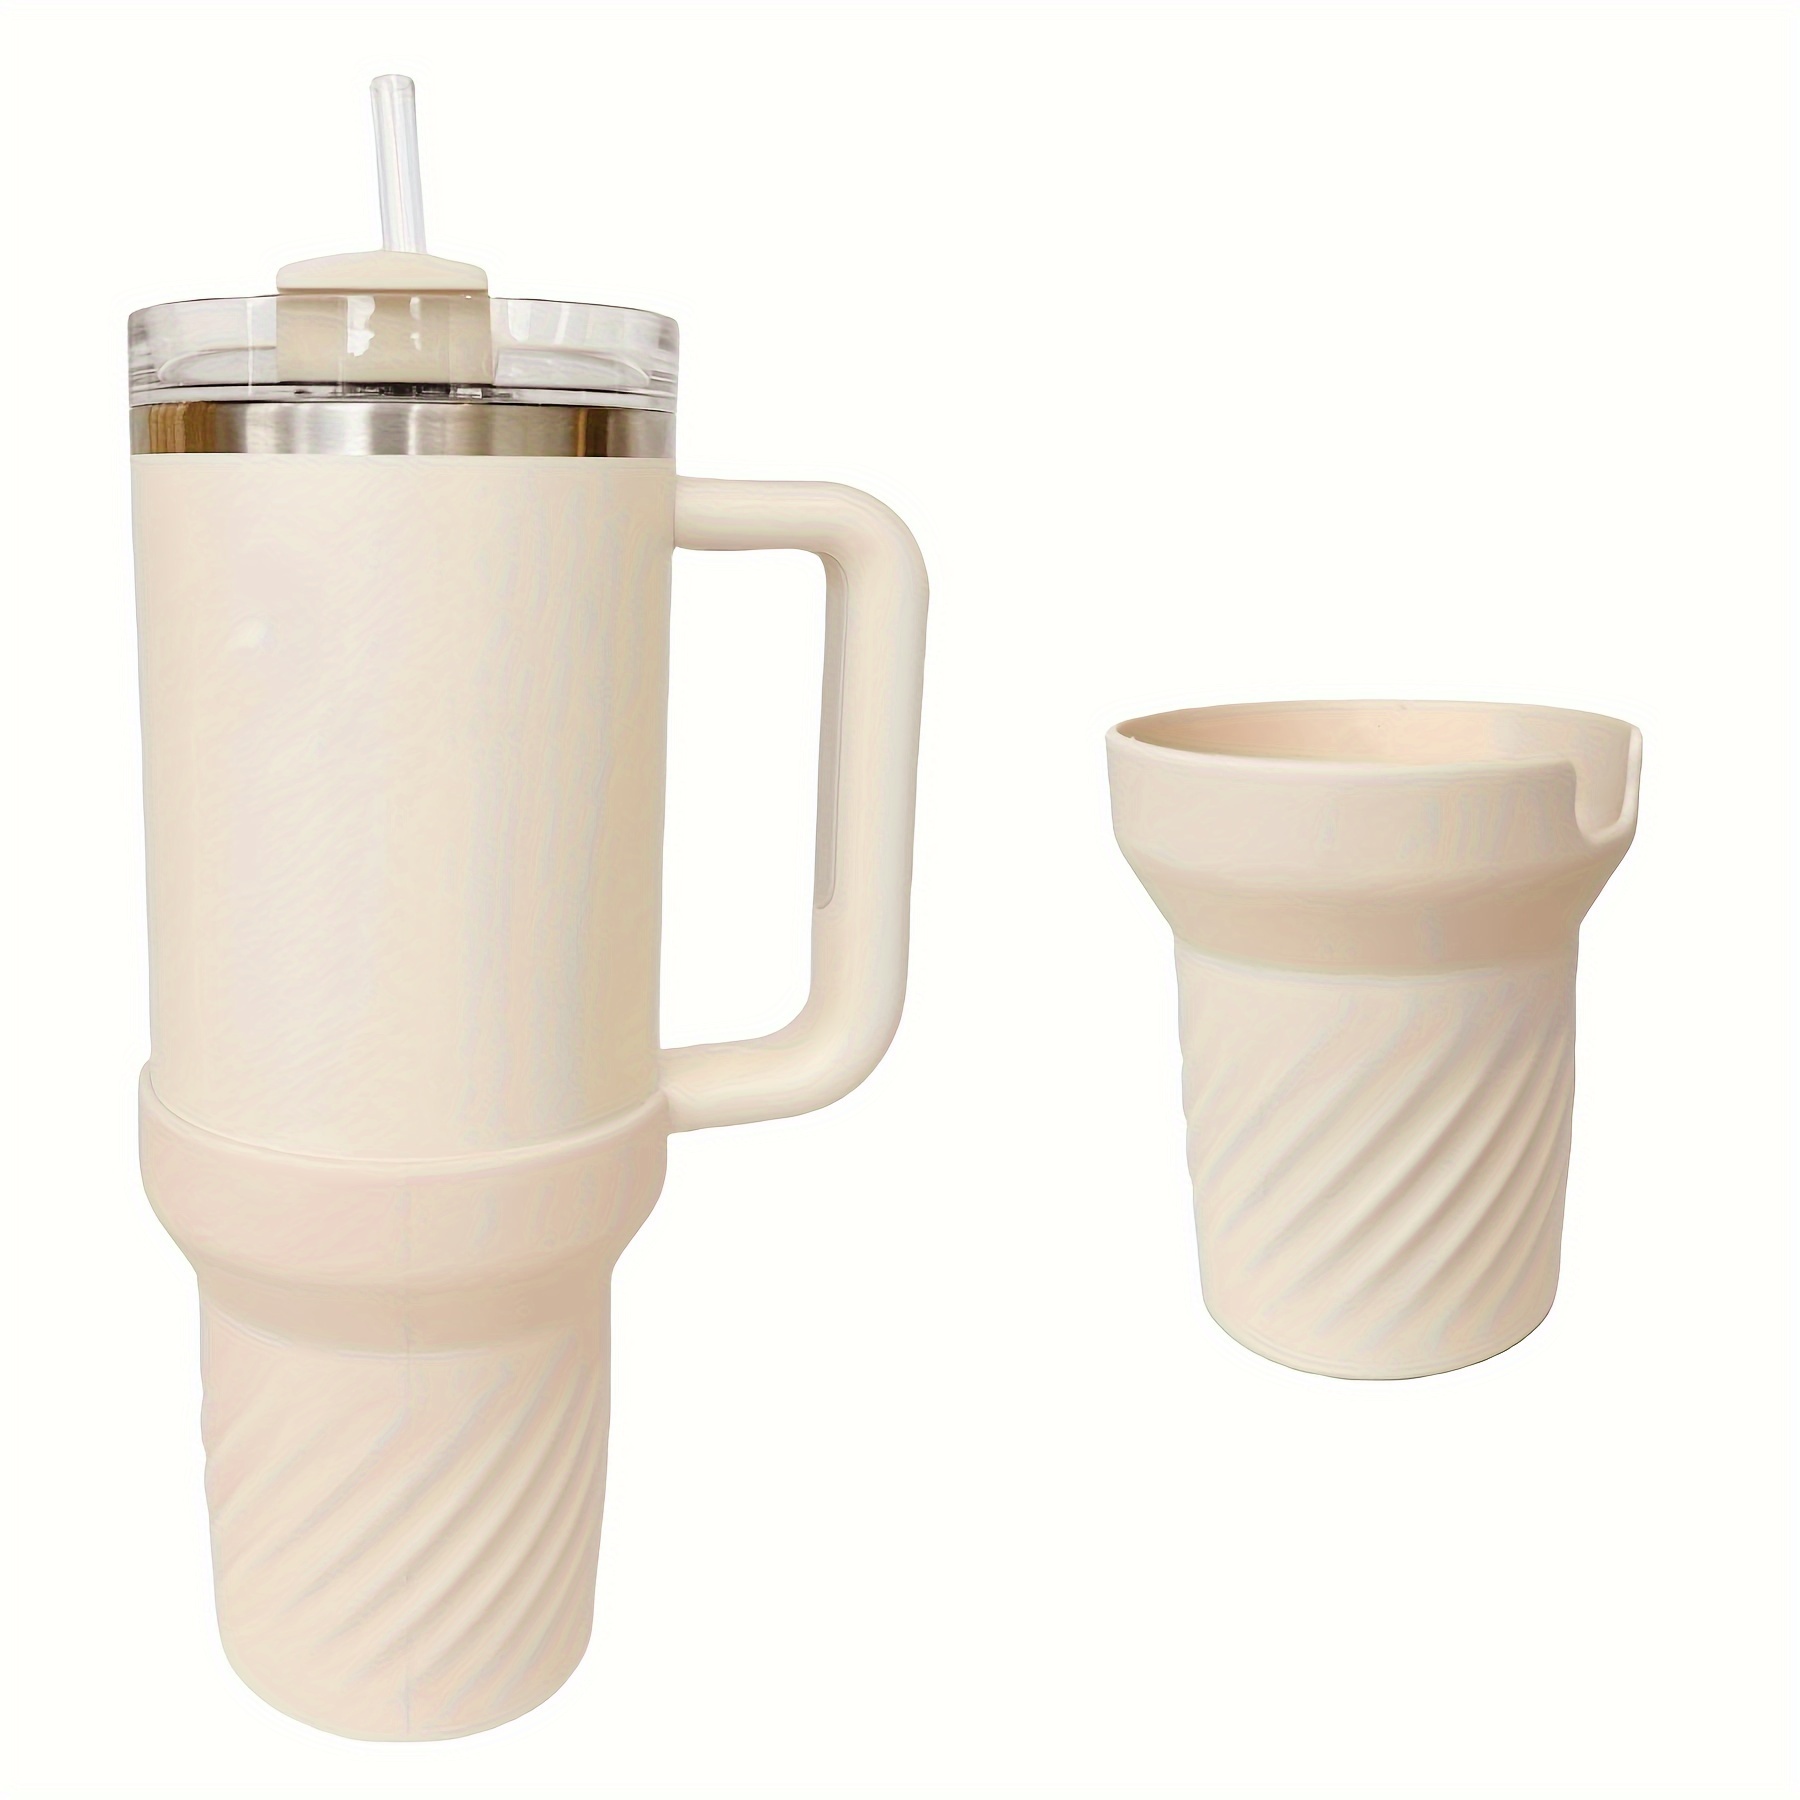 silicone boot for cup accessories, protector